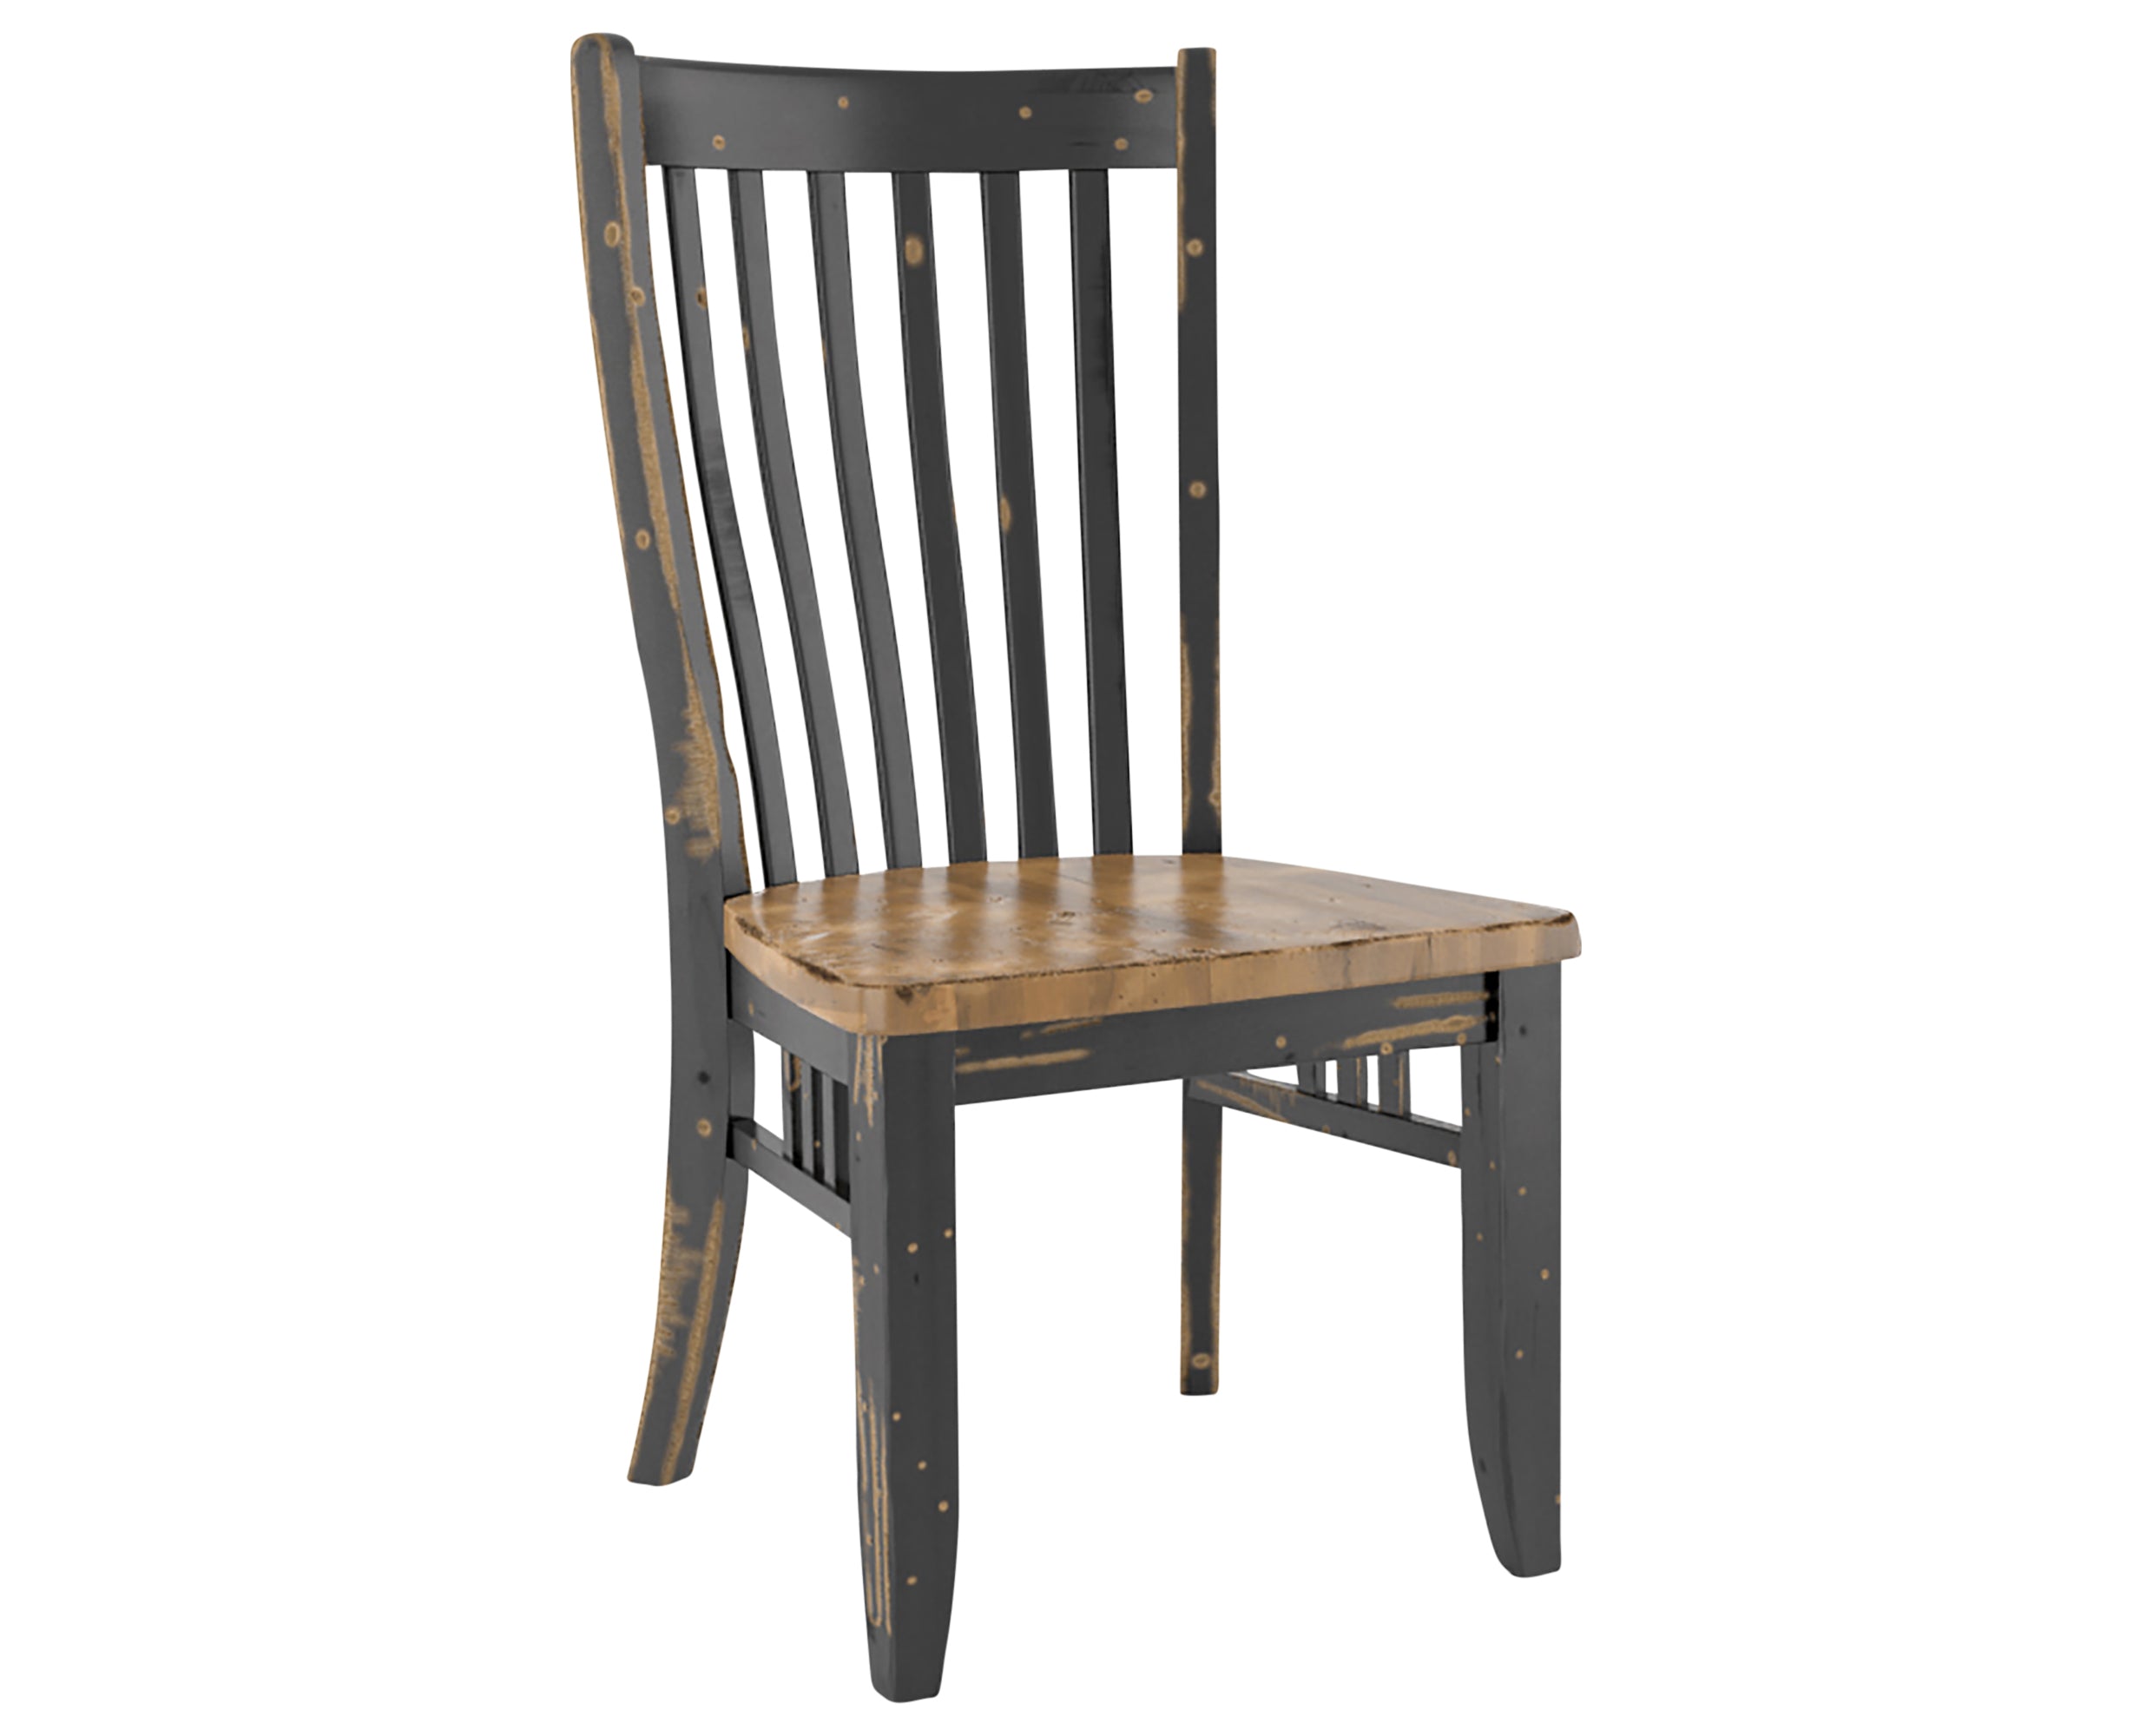 Black &amp; Oak Washed | Canadel Champlain Dining Chair 0119 | Valley Ridge Furniture